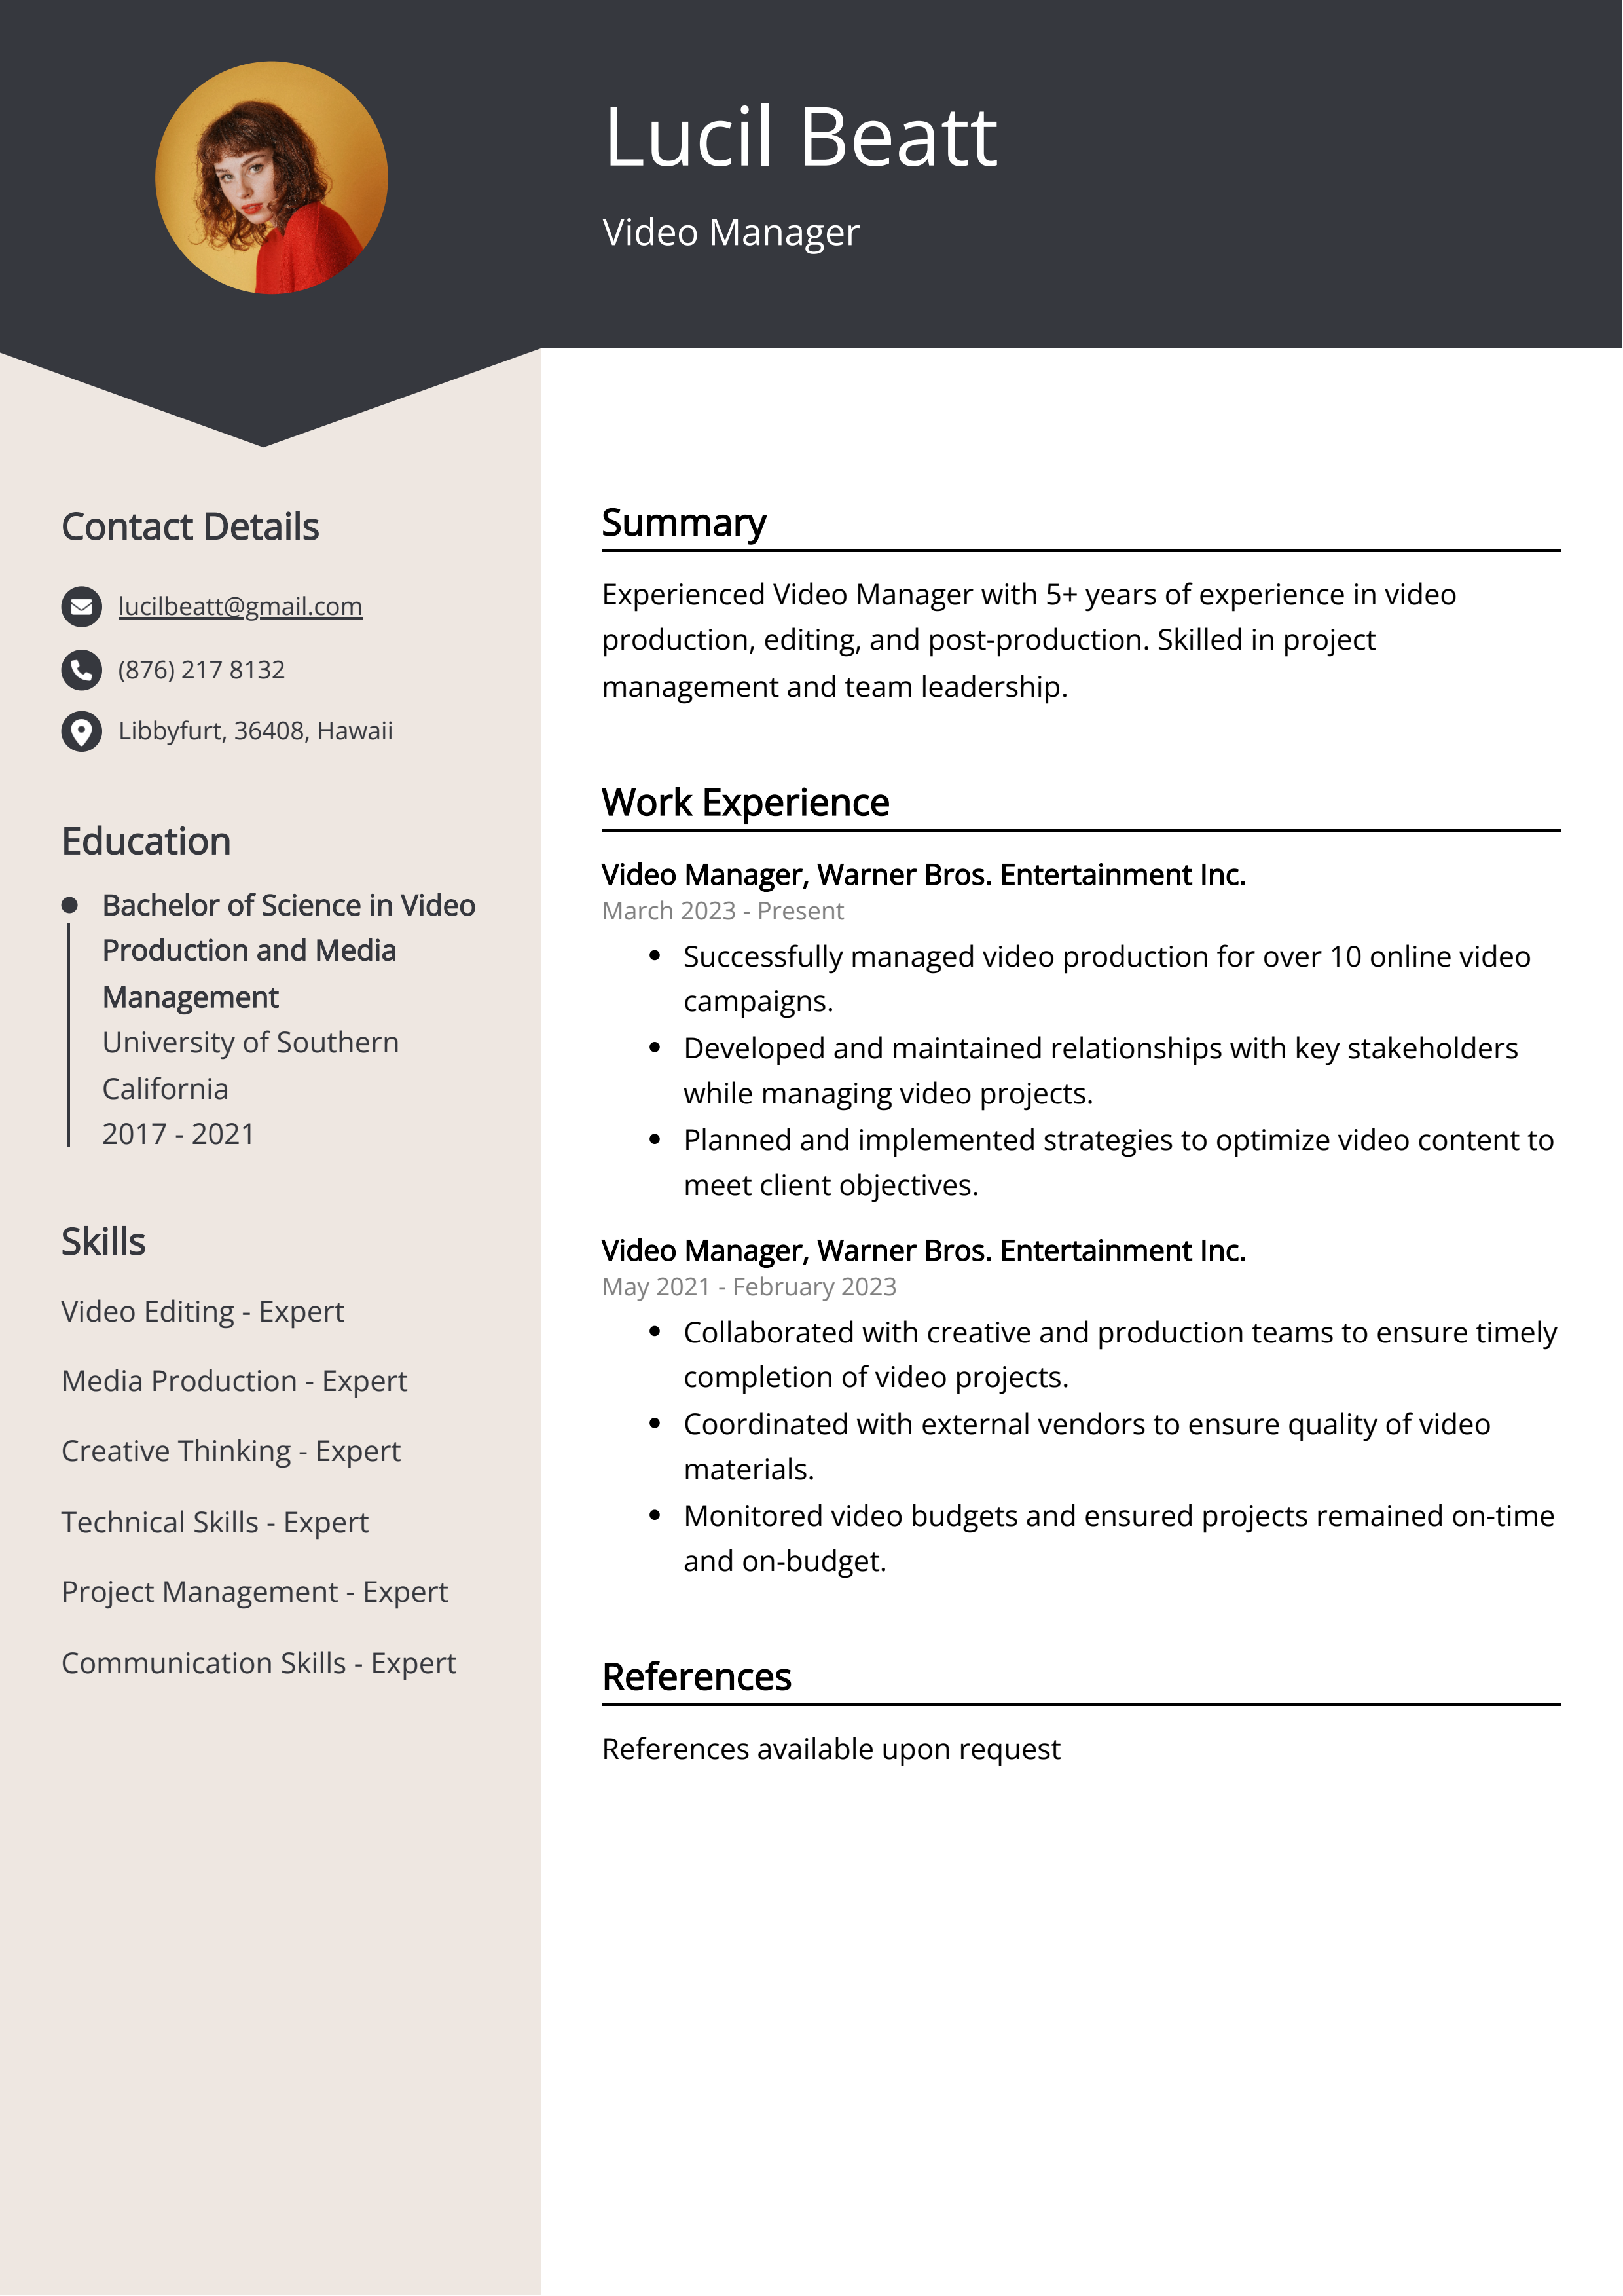 Video Manager CV Example